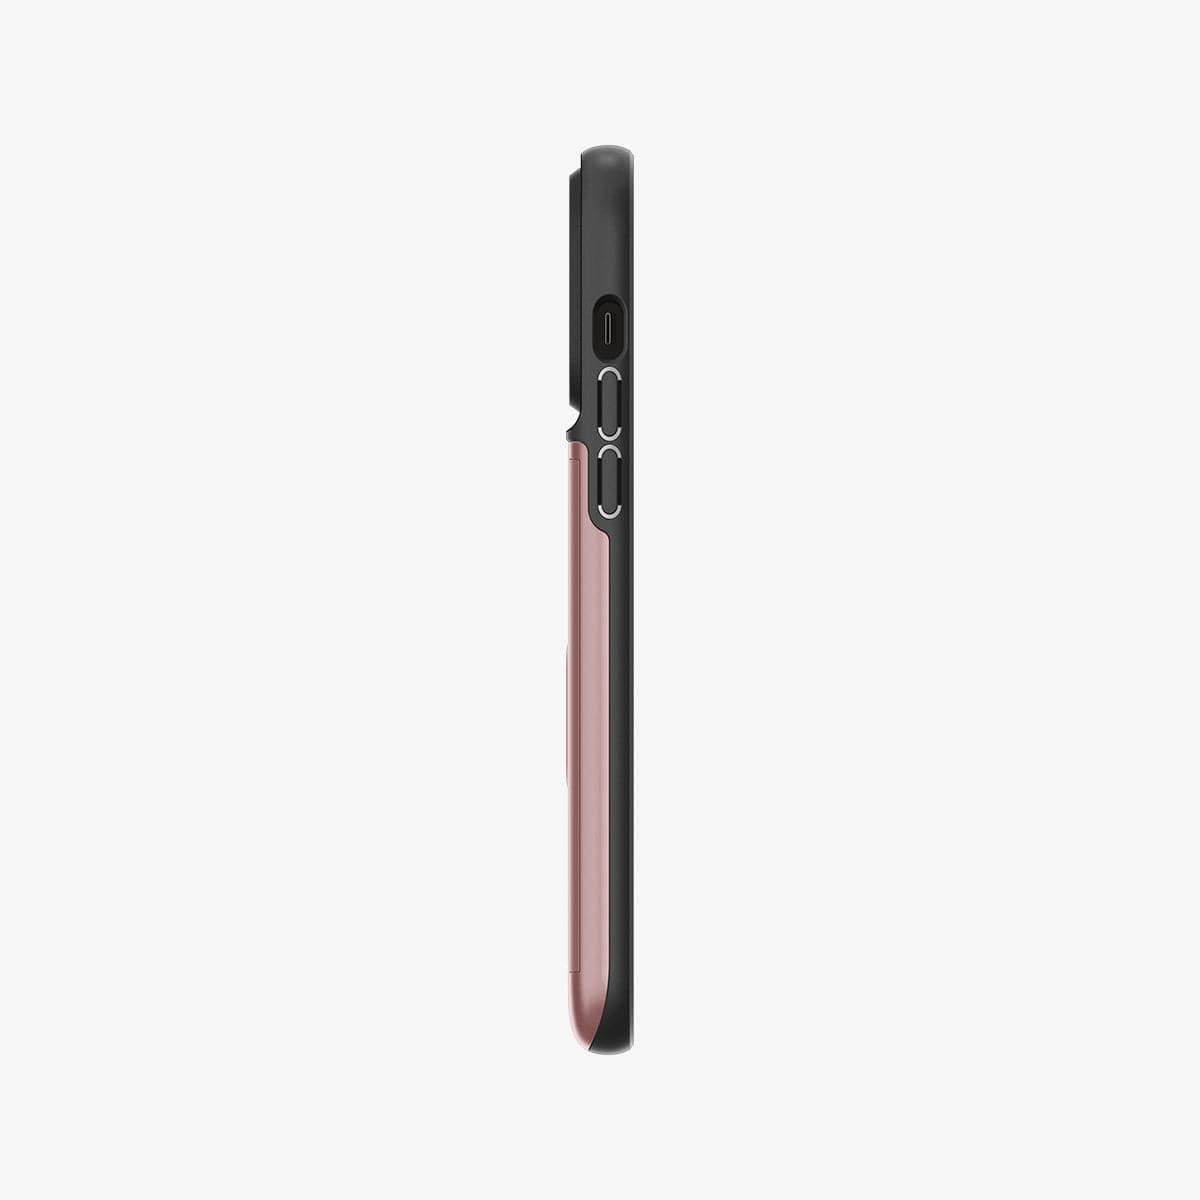 ACS04836 - iPhone 14 Pro Max Case Slim Armor CS in rose gold showing the side with volume controls